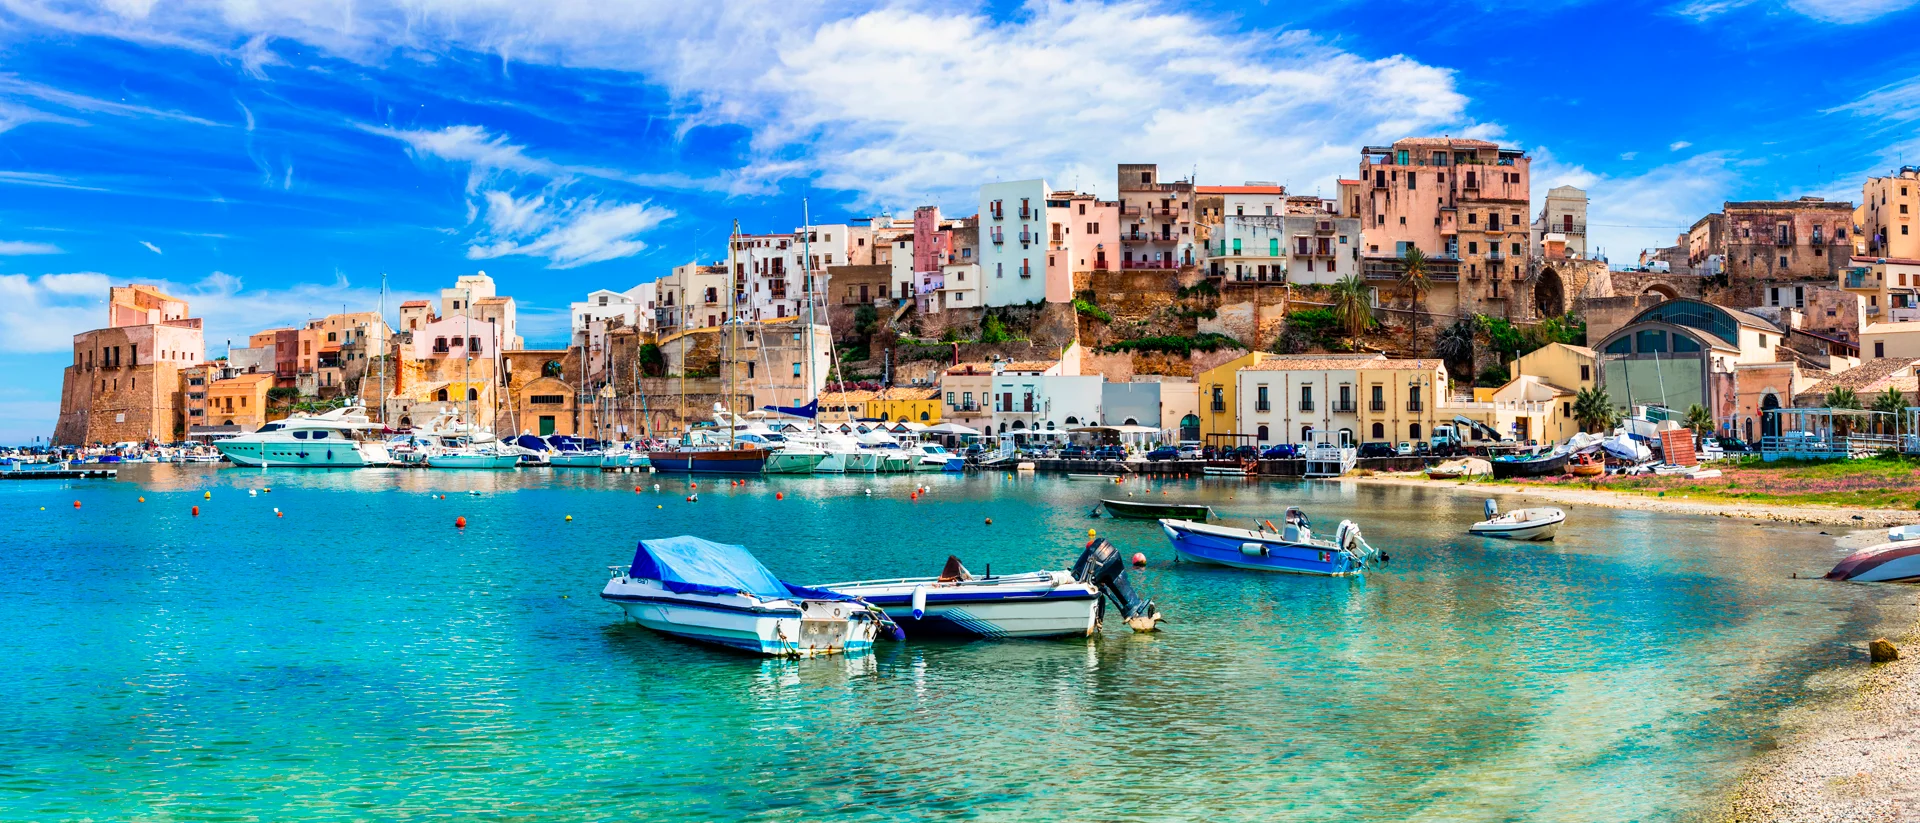 Sicily crystal water port colorful old town houses landscape